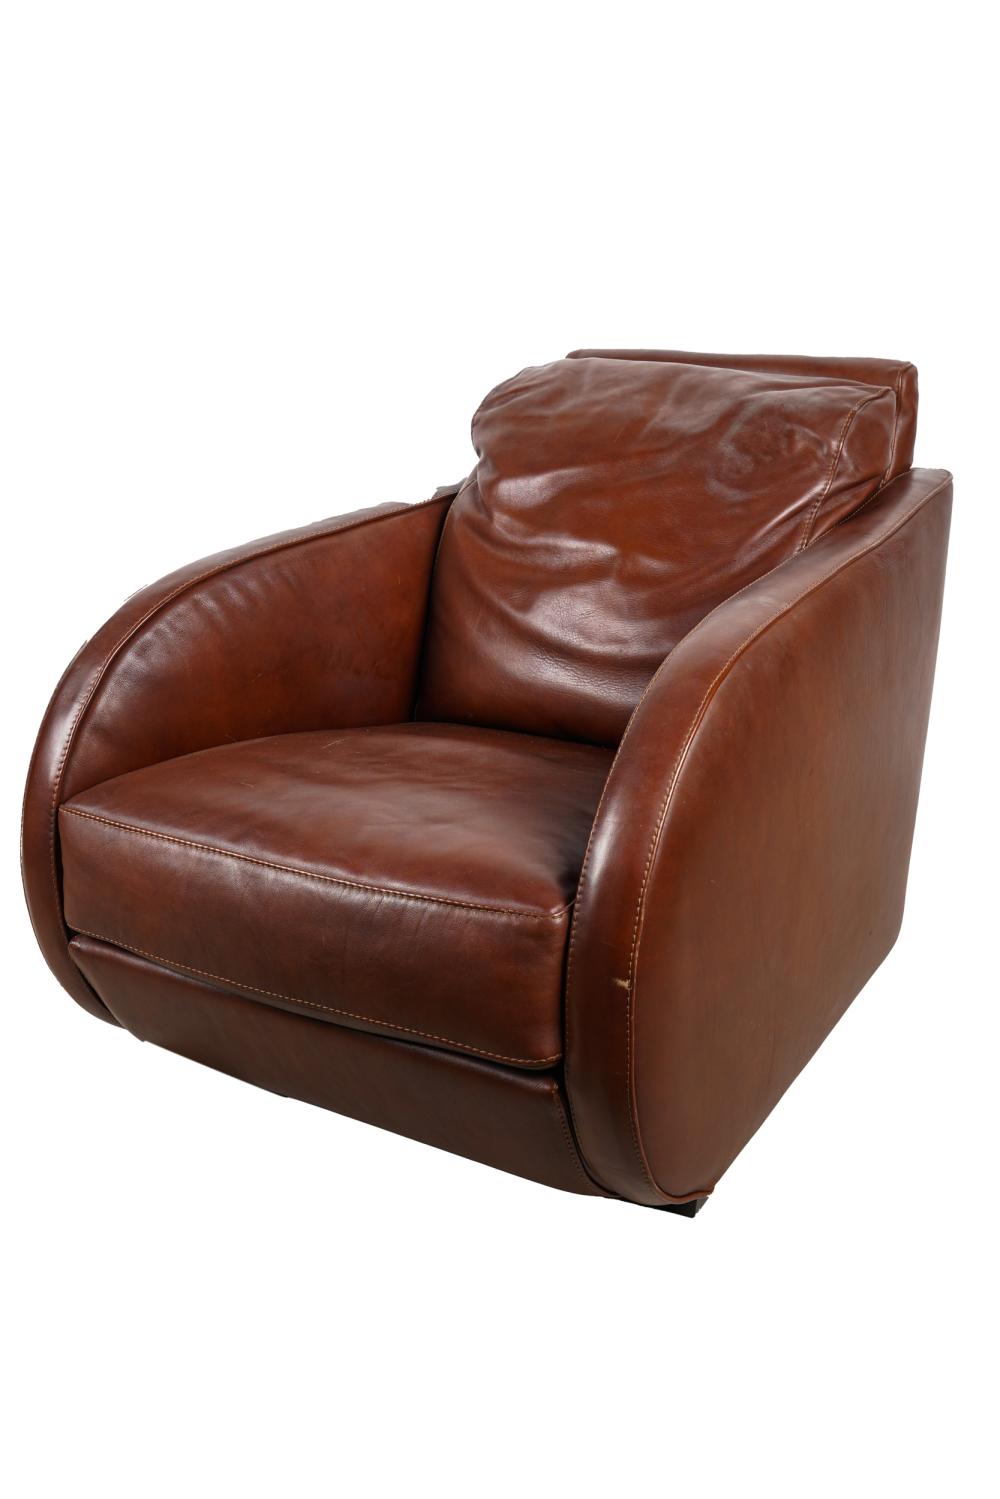 ROCHE BOBOIS LEATHER CLUB CHAIRCondition: